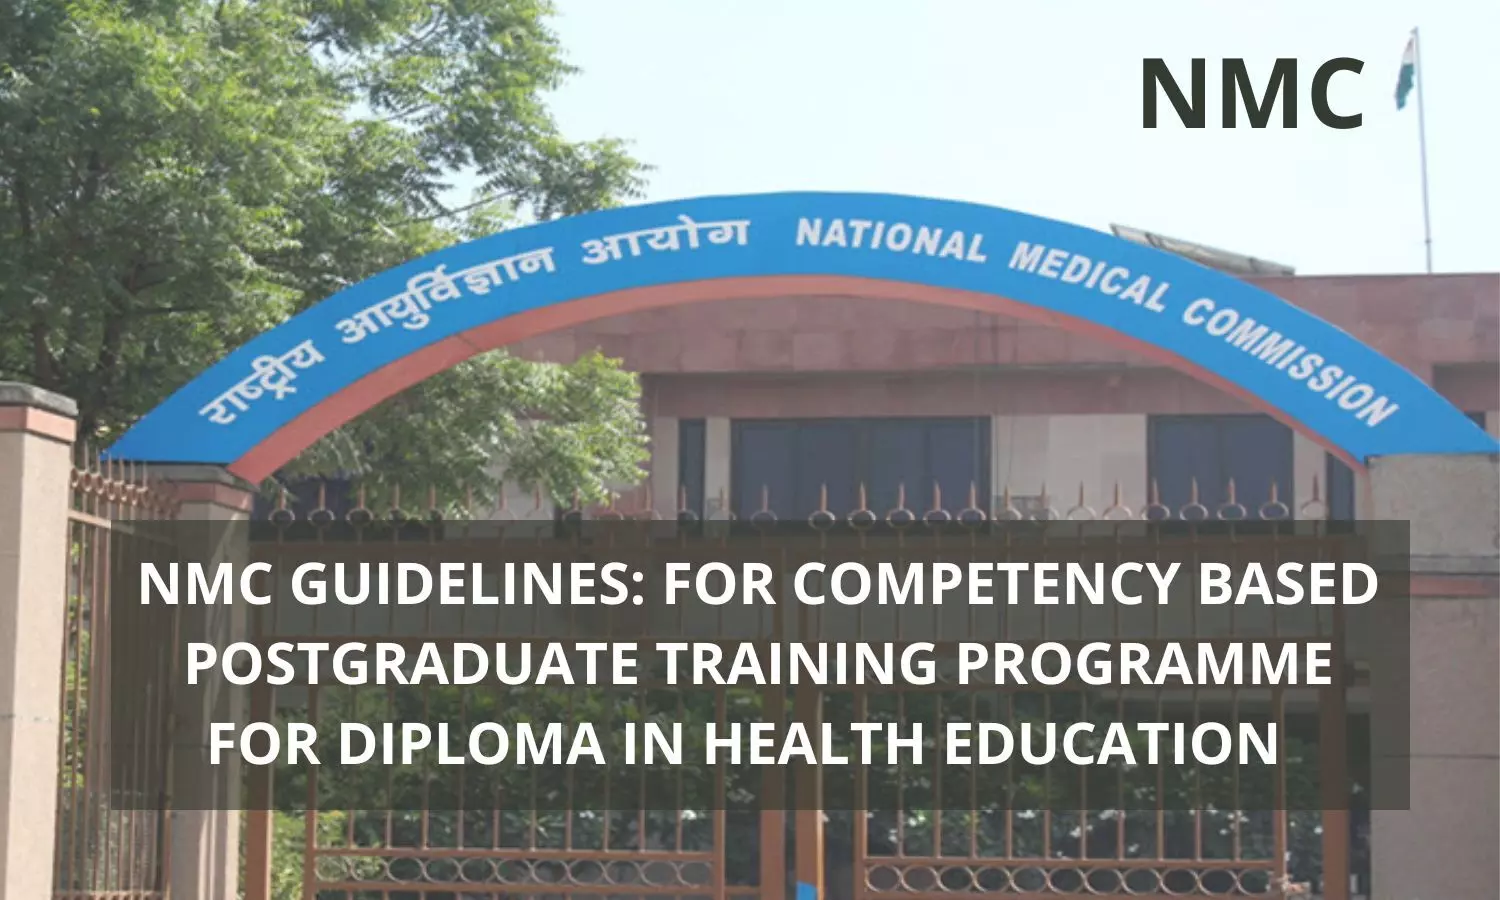 NMC Guidelines For Competency Based Training Programme For PG Diploma In Health Education